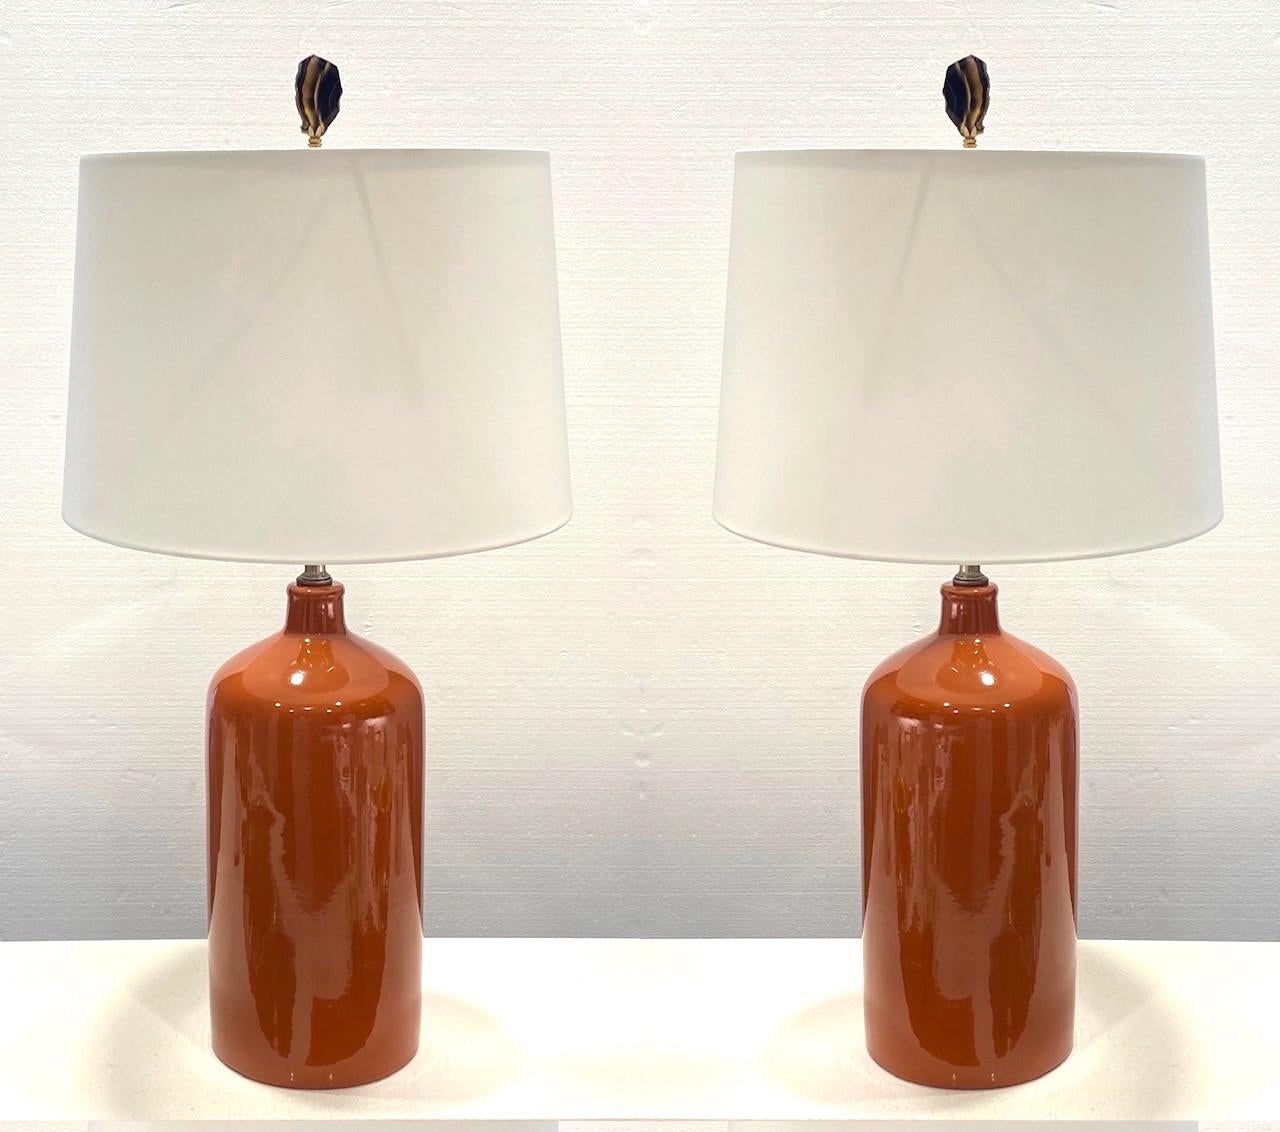 Pair of 1970s Mid-Century Modern handcrafted ceramic lamps with sleek ginger jar forms. Lamps have Minimalist cylinder pottery design with a glossy cognac or terracotta colored glaze finish. The lamp have brass fittings, and are shown with white